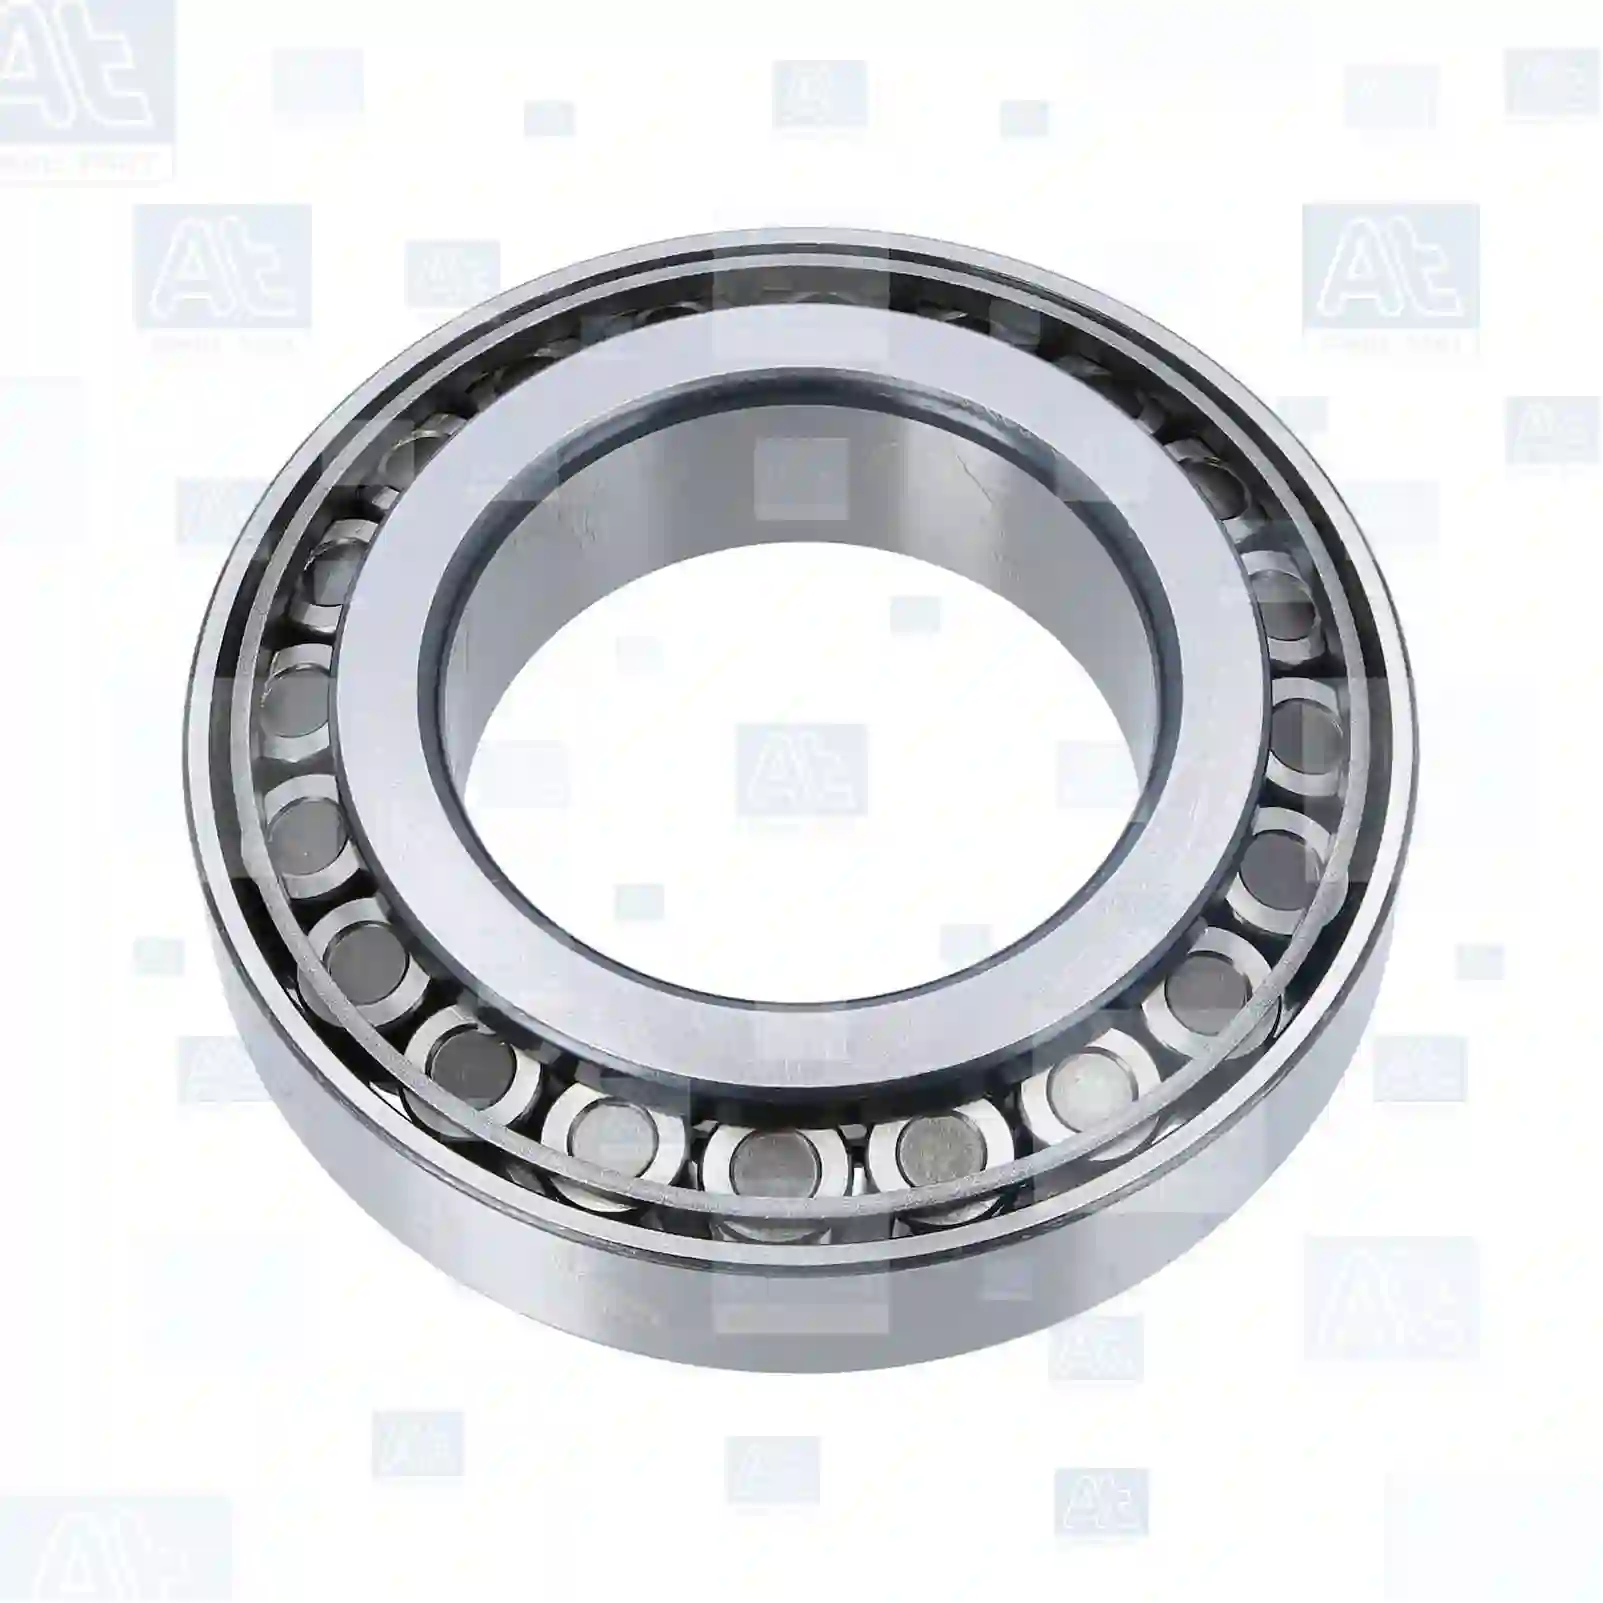 Tapered roller bearing, 77724889, 6387761, 94036568, 94050705, 94060941, 1-09812048-0, 1-09812145-0, 1-09812146-0, 1-09812151-0, 1-09812167-0, 9-00093032-0, 26800220, 3612948000, 06324990006, 0009810305, 0009812401, 0009817205, 0009819405, 000720032216, 0069810605, 38324-90000, 0959232216, 0959532216, 14103, 6691159000, 11067 ||  77724889 At Spare Part | Engine, Accelerator Pedal, Camshaft, Connecting Rod, Crankcase, Crankshaft, Cylinder Head, Engine Suspension Mountings, Exhaust Manifold, Exhaust Gas Recirculation, Filter Kits, Flywheel Housing, General Overhaul Kits, Engine, Intake Manifold, Oil Cleaner, Oil Cooler, Oil Filter, Oil Pump, Oil Sump, Piston & Liner, Sensor & Switch, Timing Case, Turbocharger, Cooling System, Belt Tensioner, Coolant Filter, Coolant Pipe, Corrosion Prevention Agent, Drive, Expansion Tank, Fan, Intercooler, Monitors & Gauges, Radiator, Thermostat, V-Belt / Timing belt, Water Pump, Fuel System, Electronical Injector Unit, Feed Pump, Fuel Filter, cpl., Fuel Gauge Sender,  Fuel Line, Fuel Pump, Fuel Tank, Injection Line Kit, Injection Pump, Exhaust System, Clutch & Pedal, Gearbox, Propeller Shaft, Axles, Brake System, Hubs & Wheels, Suspension, Leaf Spring, Universal Parts / Accessories, Steering, Electrical System, Cabin Tapered roller bearing, 77724889, 6387761, 94036568, 94050705, 94060941, 1-09812048-0, 1-09812145-0, 1-09812146-0, 1-09812151-0, 1-09812167-0, 9-00093032-0, 26800220, 3612948000, 06324990006, 0009810305, 0009812401, 0009817205, 0009819405, 000720032216, 0069810605, 38324-90000, 0959232216, 0959532216, 14103, 6691159000, 11067 ||  77724889 At Spare Part | Engine, Accelerator Pedal, Camshaft, Connecting Rod, Crankcase, Crankshaft, Cylinder Head, Engine Suspension Mountings, Exhaust Manifold, Exhaust Gas Recirculation, Filter Kits, Flywheel Housing, General Overhaul Kits, Engine, Intake Manifold, Oil Cleaner, Oil Cooler, Oil Filter, Oil Pump, Oil Sump, Piston & Liner, Sensor & Switch, Timing Case, Turbocharger, Cooling System, Belt Tensioner, Coolant Filter, Coolant Pipe, Corrosion Prevention Agent, Drive, Expansion Tank, Fan, Intercooler, Monitors & Gauges, Radiator, Thermostat, V-Belt / Timing belt, Water Pump, Fuel System, Electronical Injector Unit, Feed Pump, Fuel Filter, cpl., Fuel Gauge Sender,  Fuel Line, Fuel Pump, Fuel Tank, Injection Line Kit, Injection Pump, Exhaust System, Clutch & Pedal, Gearbox, Propeller Shaft, Axles, Brake System, Hubs & Wheels, Suspension, Leaf Spring, Universal Parts / Accessories, Steering, Electrical System, Cabin